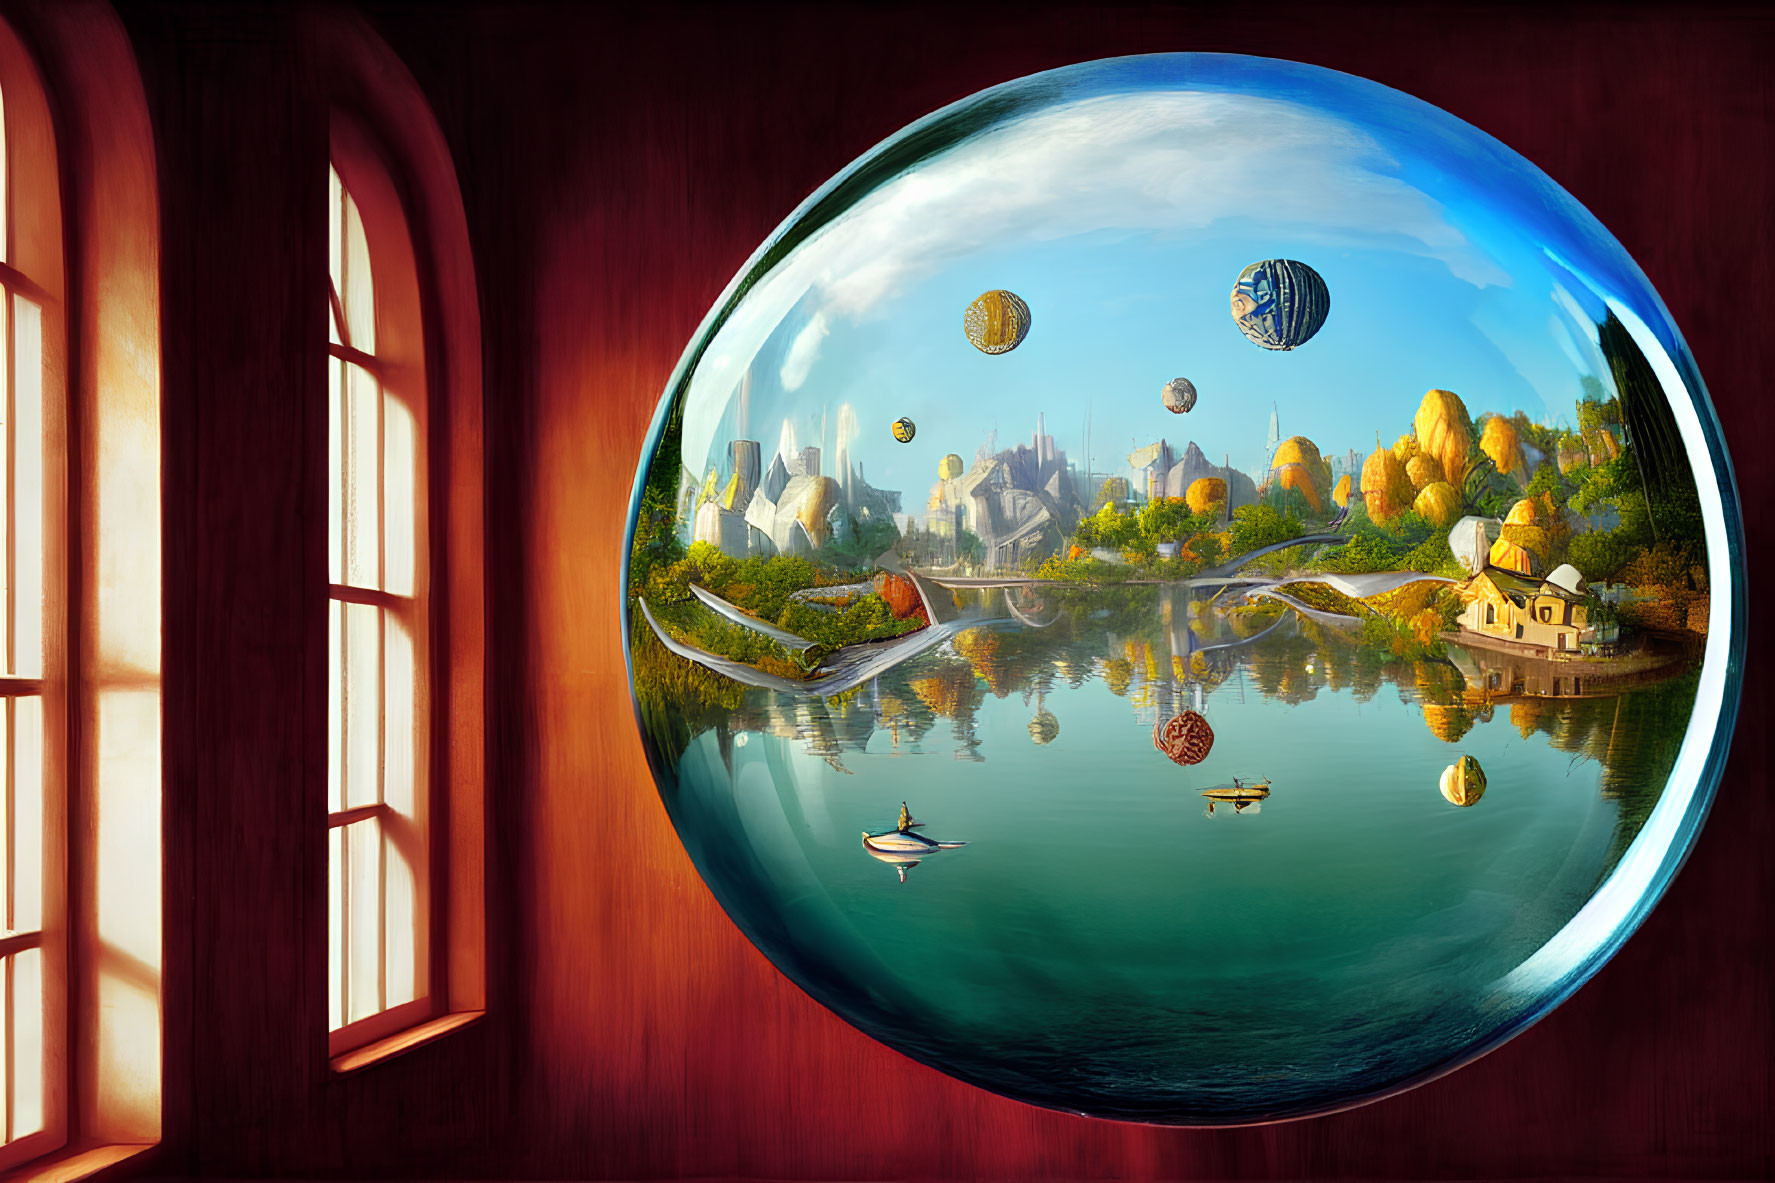 Surreal autumn landscape with floating islands and hot air balloons viewed through circular window